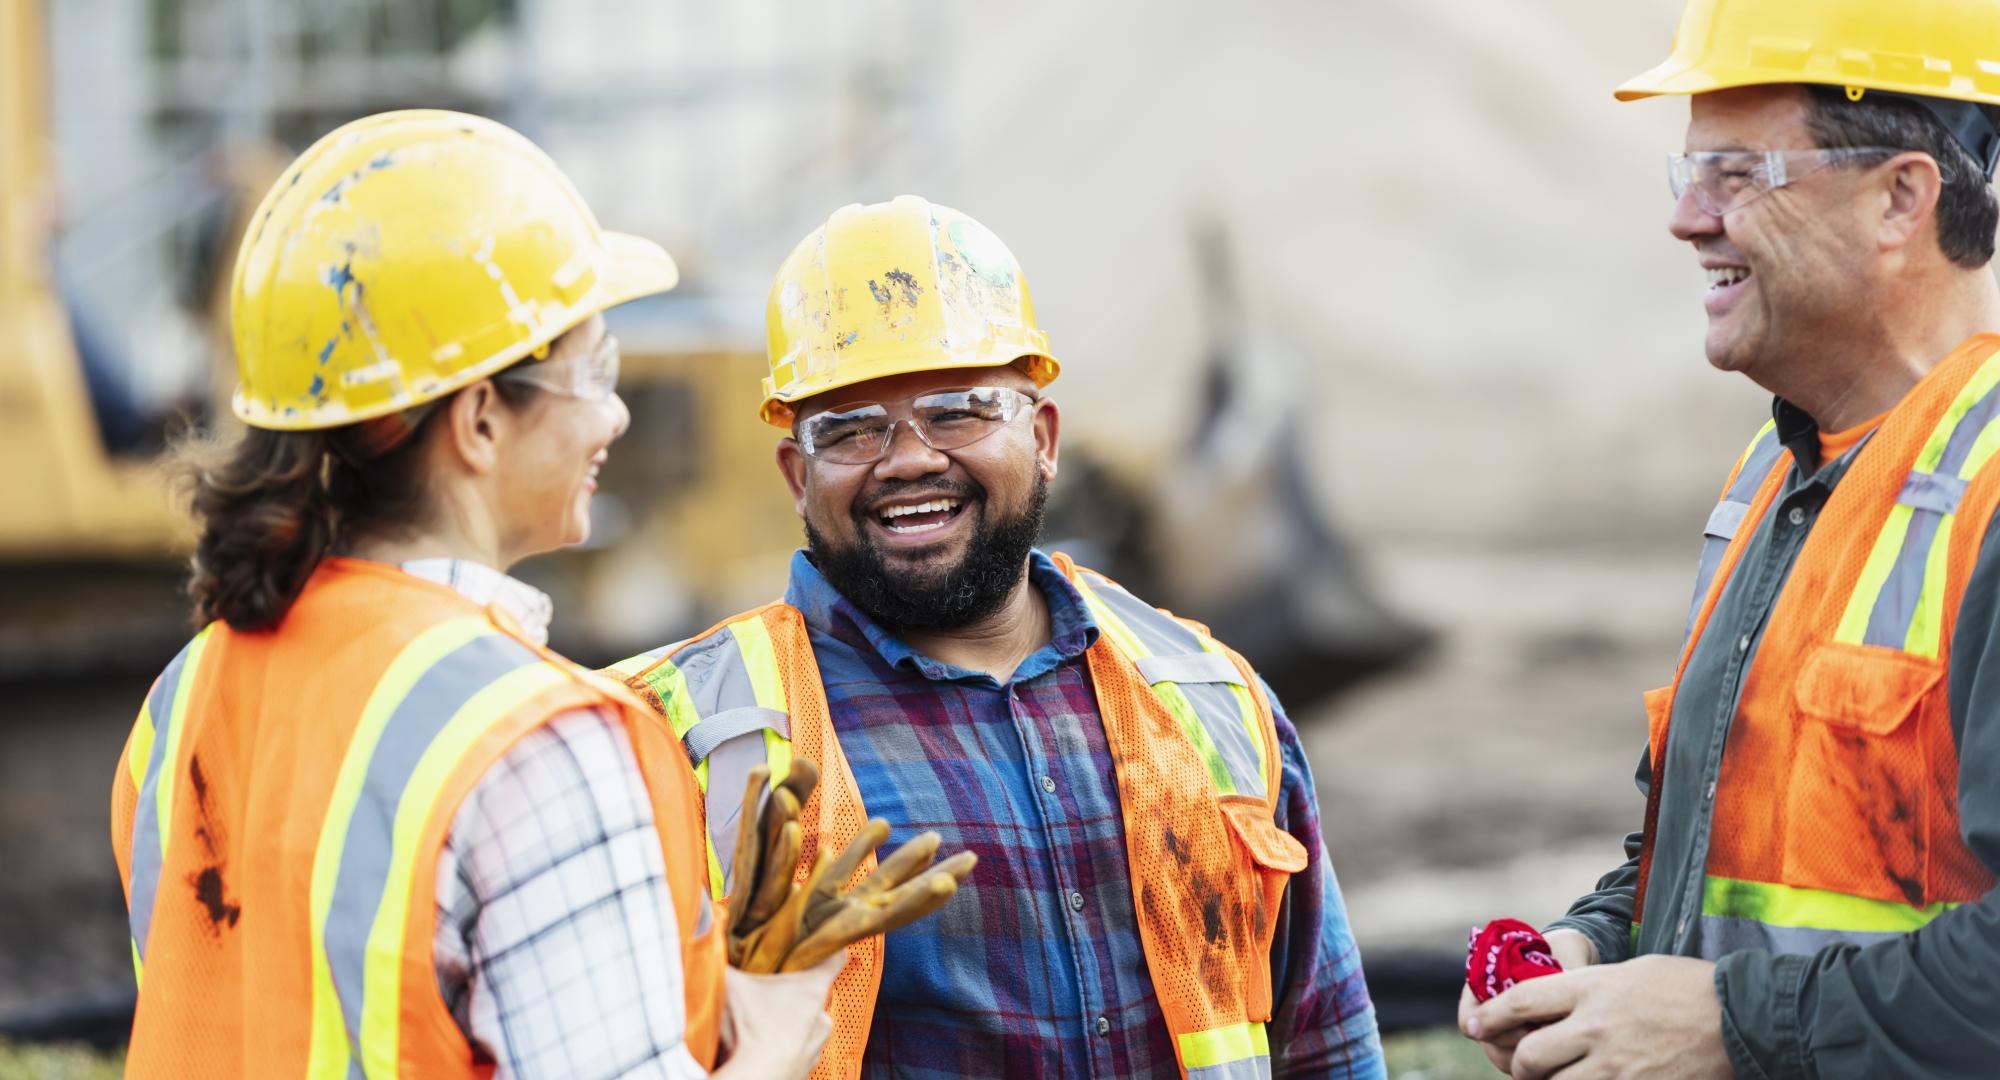 A group of three multi-ethnic workers at a construction site wearing hard hats, safety glasses and reflective clothing, smiling and conversing